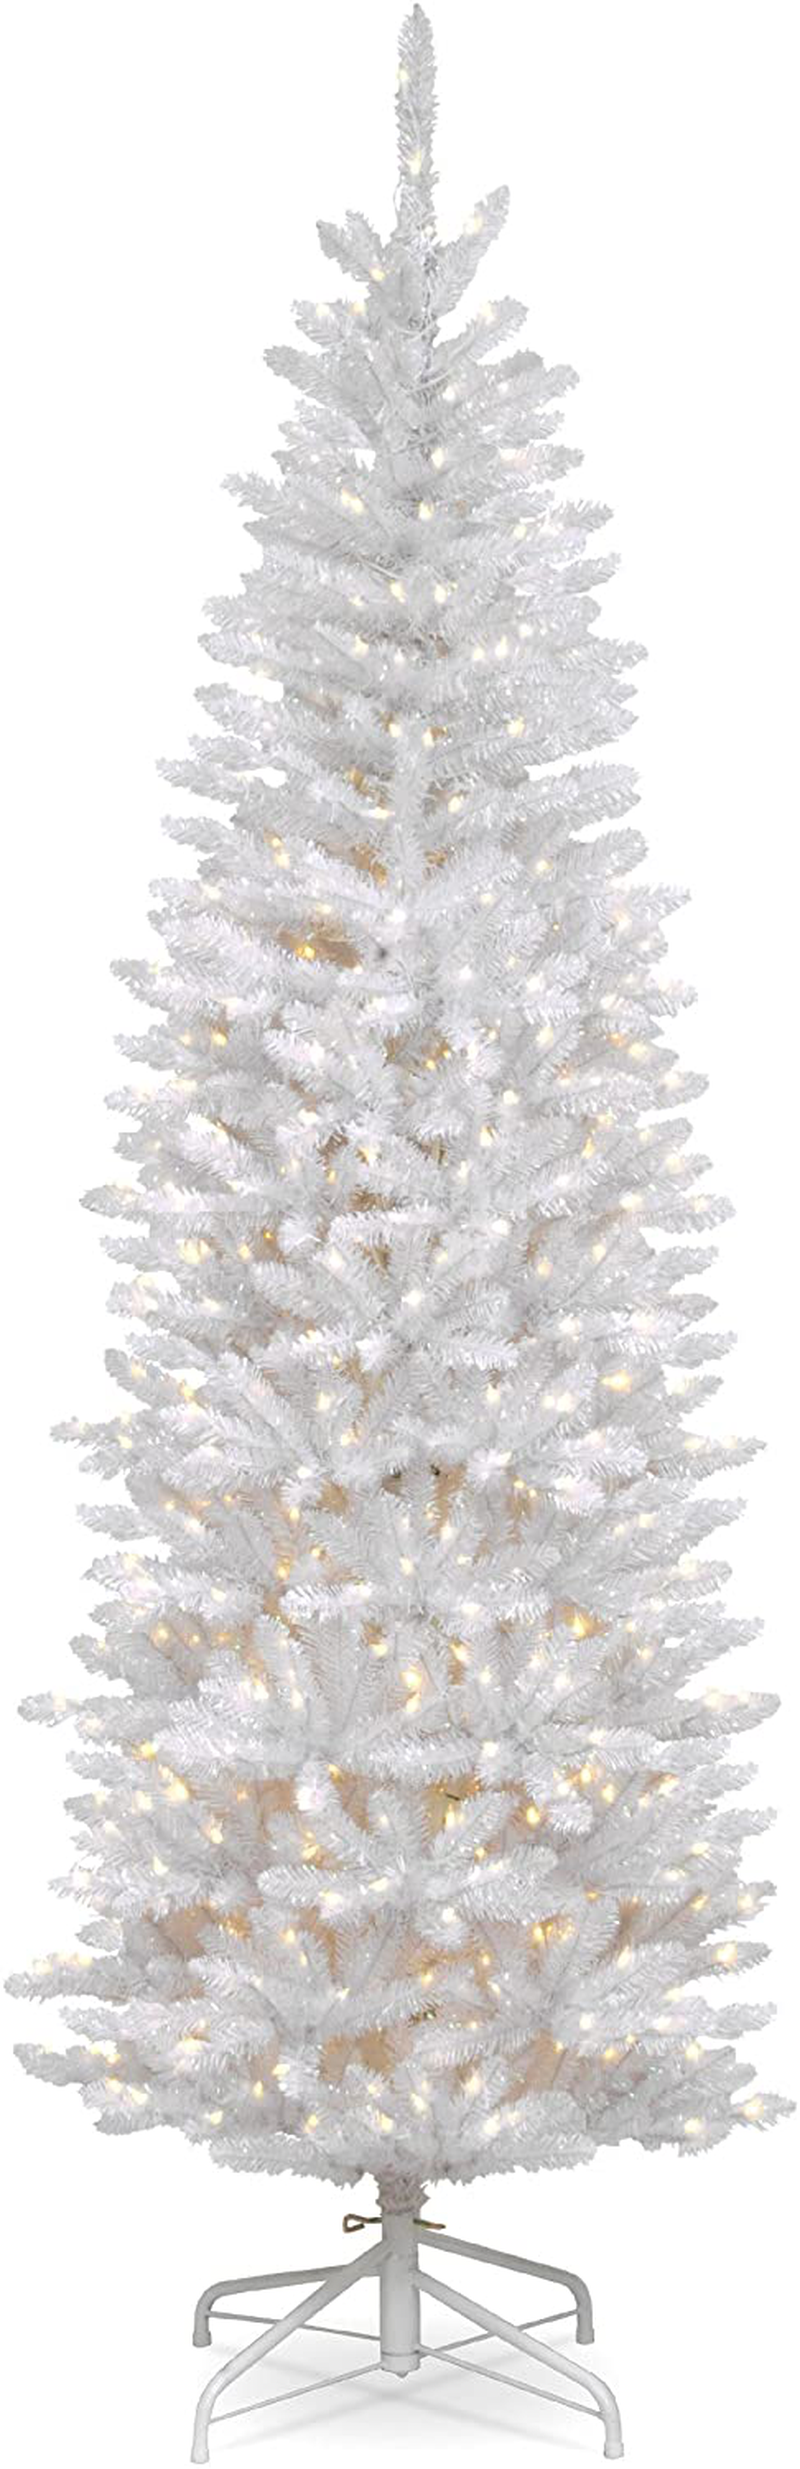 National Tree Company Pre-lit Artificial Christmas Tree Includes Strung White Lights and Stand Kingswood Fir Pencil-10, 10 ft Home & Garden > Decor > Seasonal & Holiday Decorations > Christmas Tree Stands National Tree Company Tree 7.5 ft 